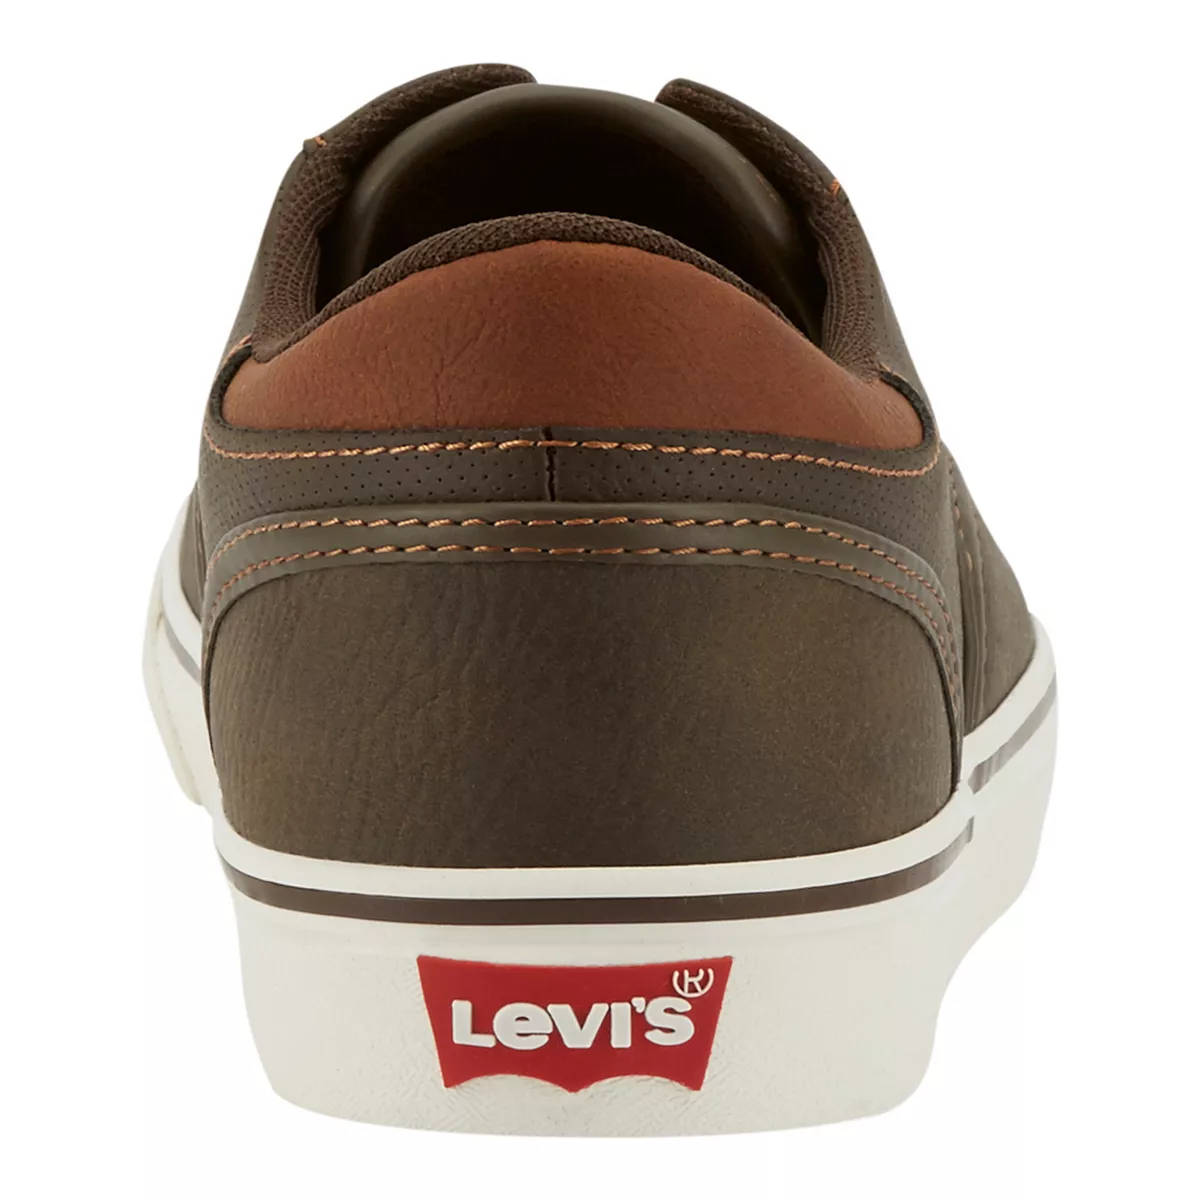 Levi's Mens Ethan Perforated Sneakers